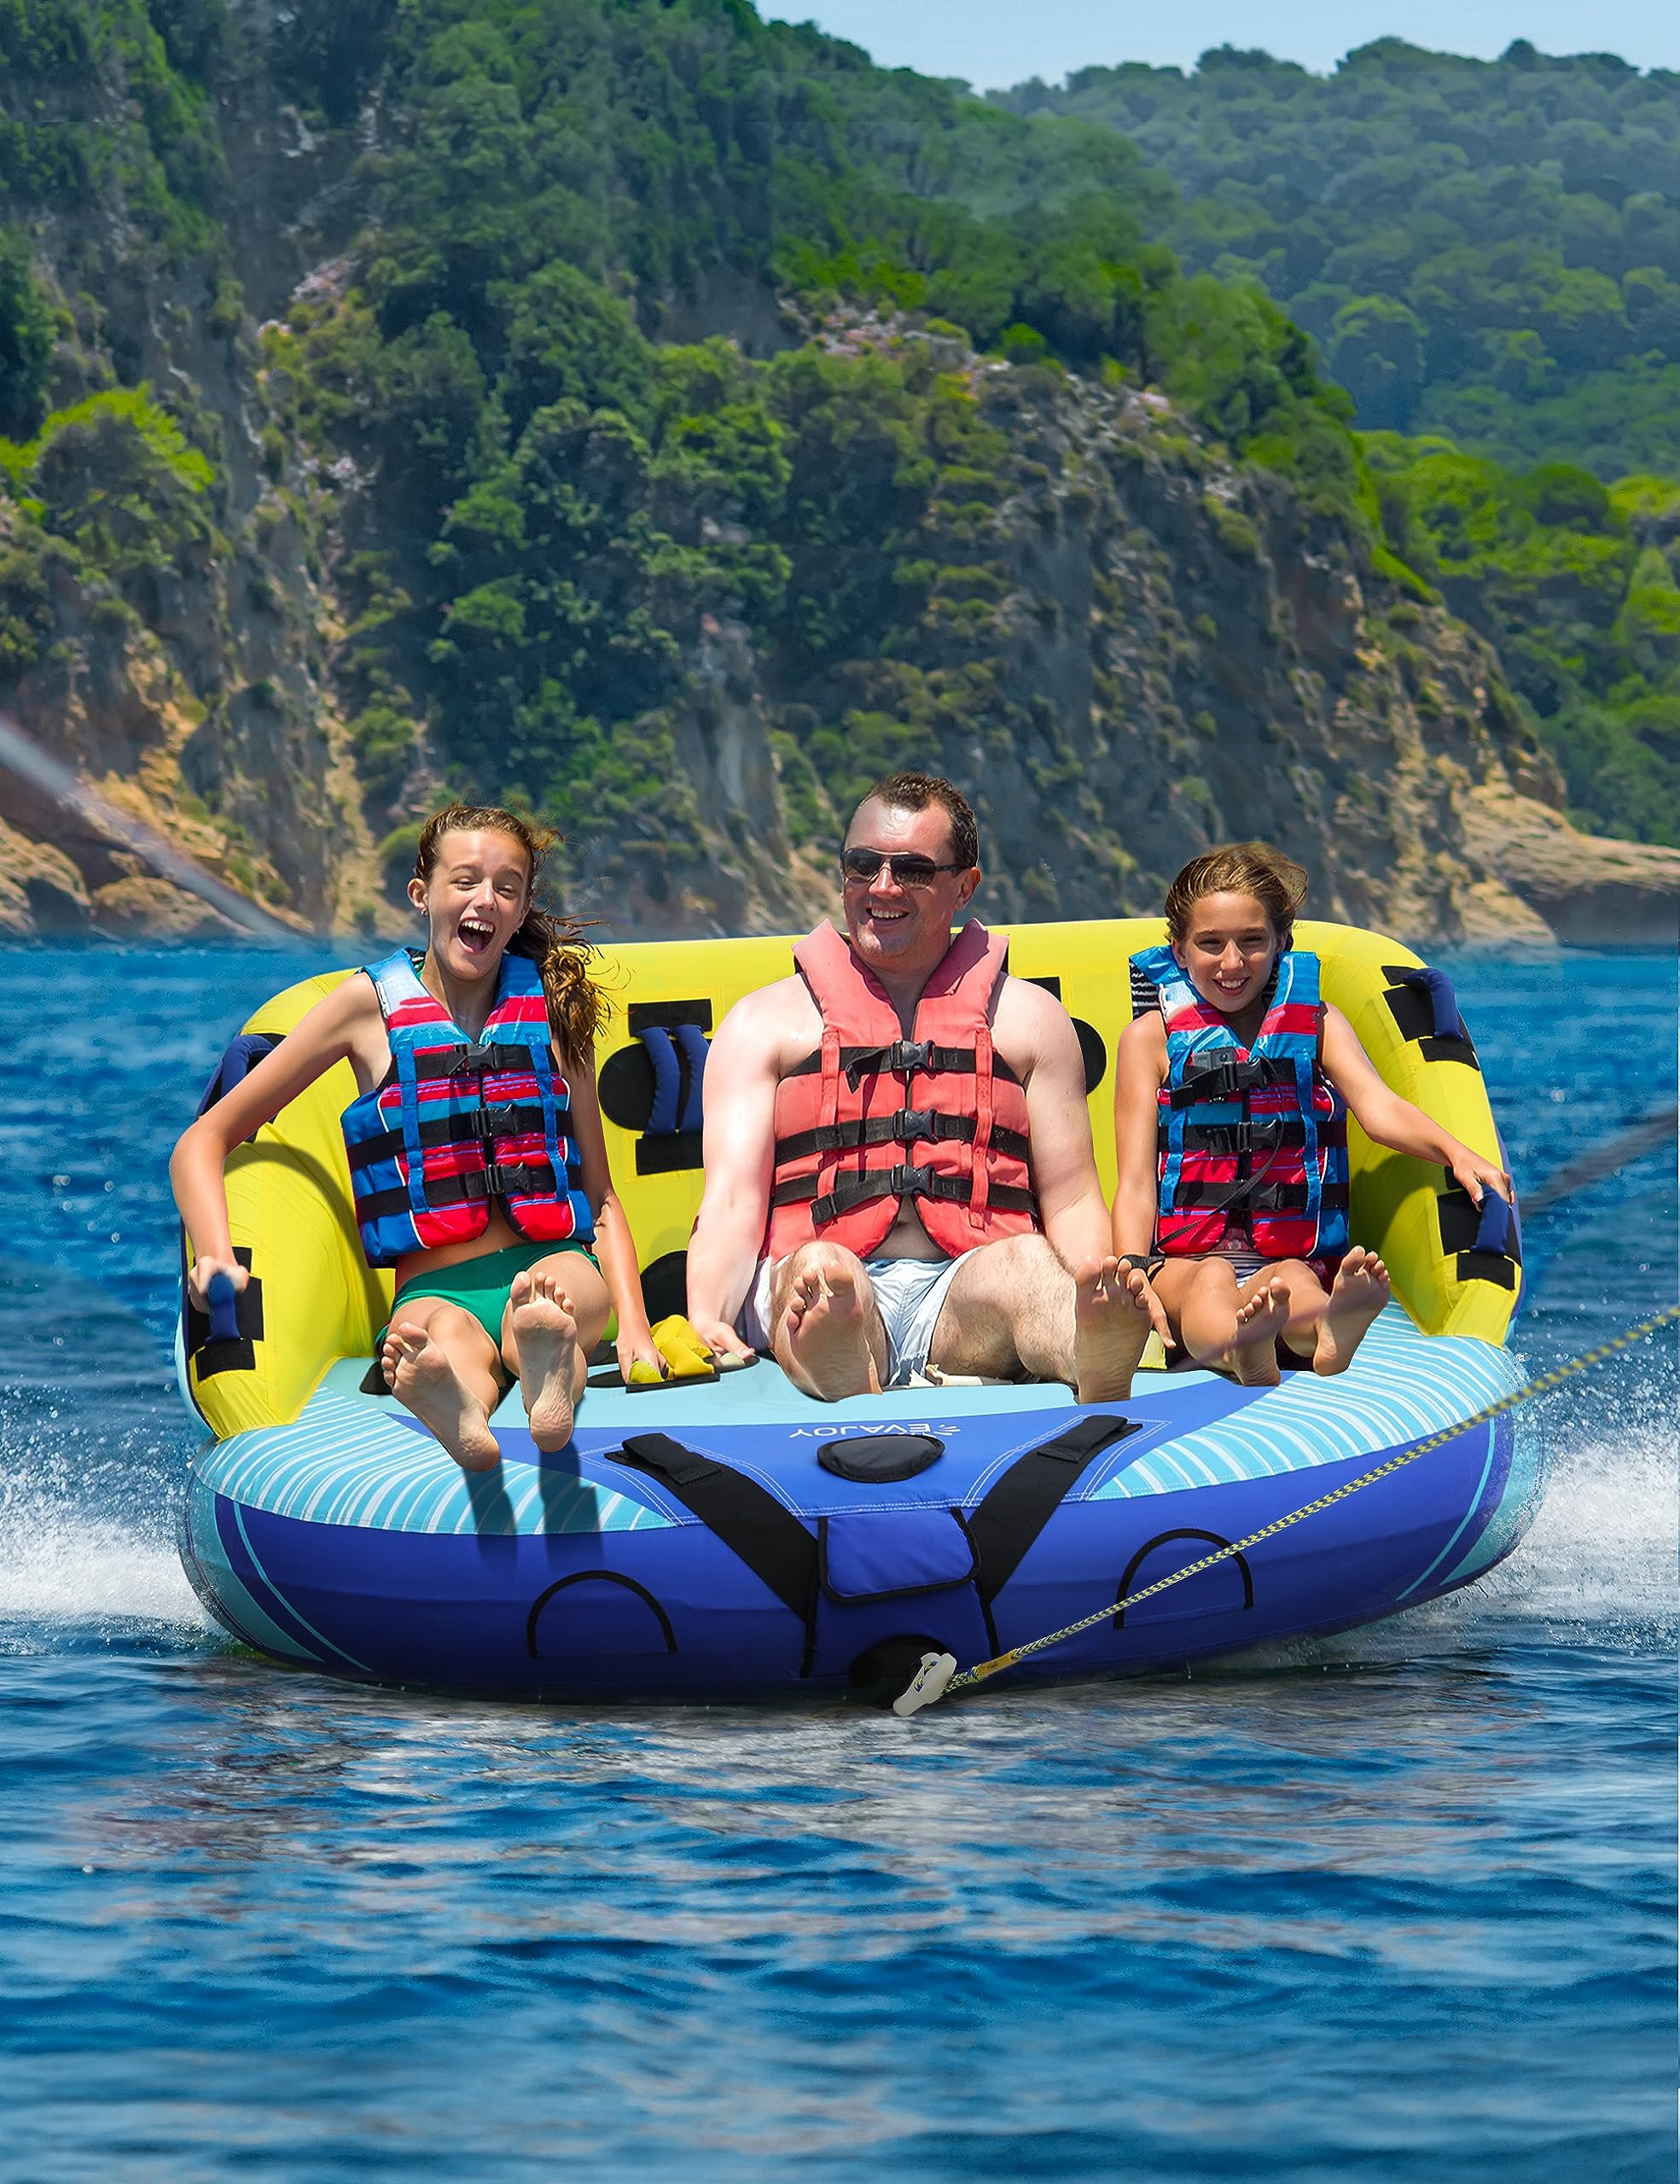 EVAJOY 3 Person Towable Tube for Boating, Inflatable Towable Tubes for Boats 1-3 Rider, Water Sports Tube with Dual Front and Back Tow Points, Inflatable Boat with Nylon Tow Rope and Air Pump